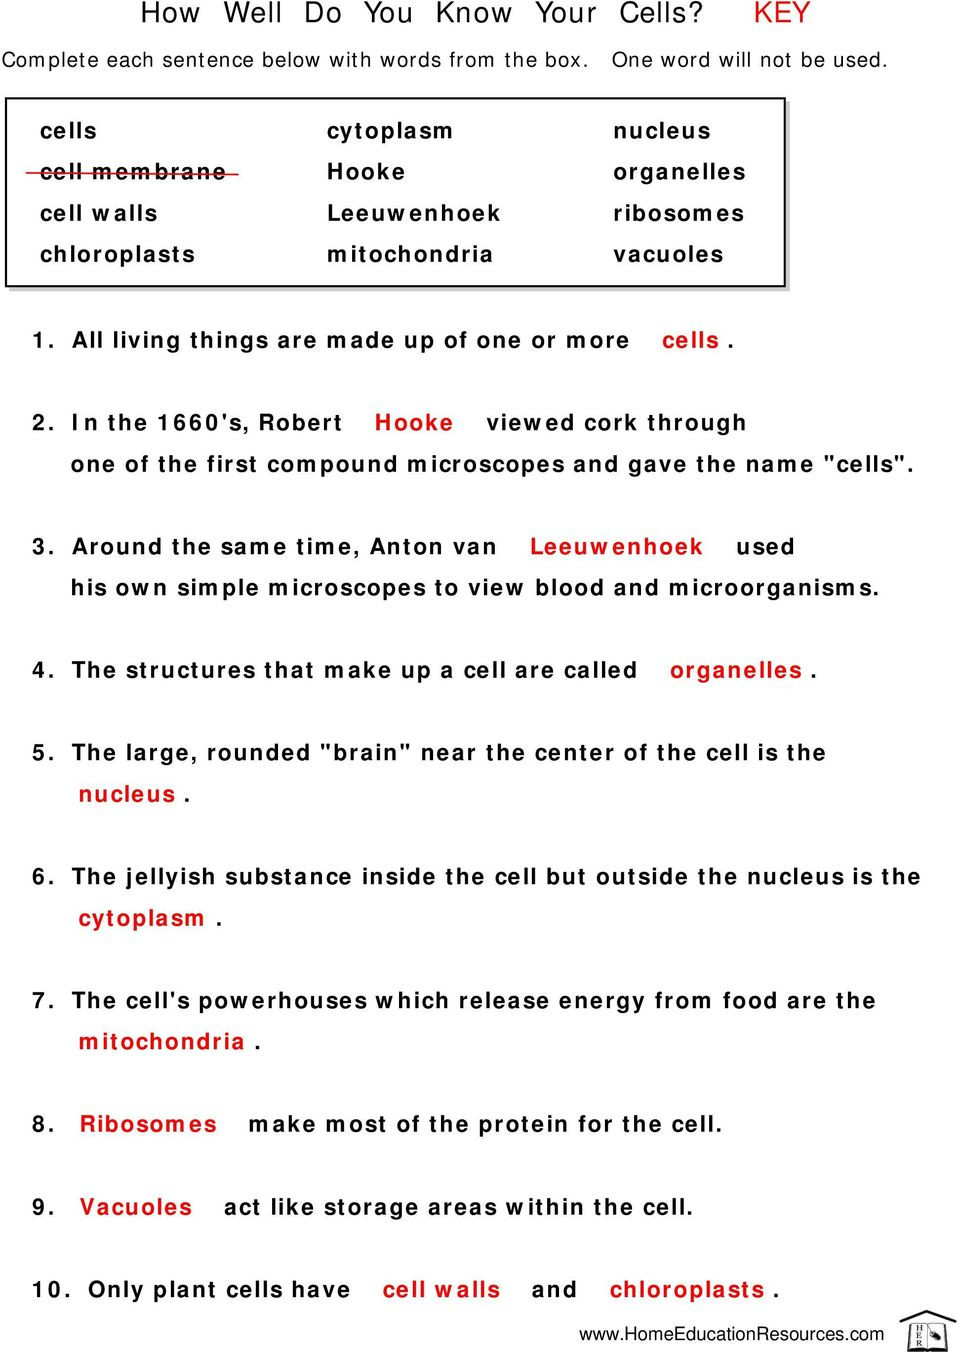 Cells and organelles Worksheet How Well Do You Know Your Cells Pdf Free Download